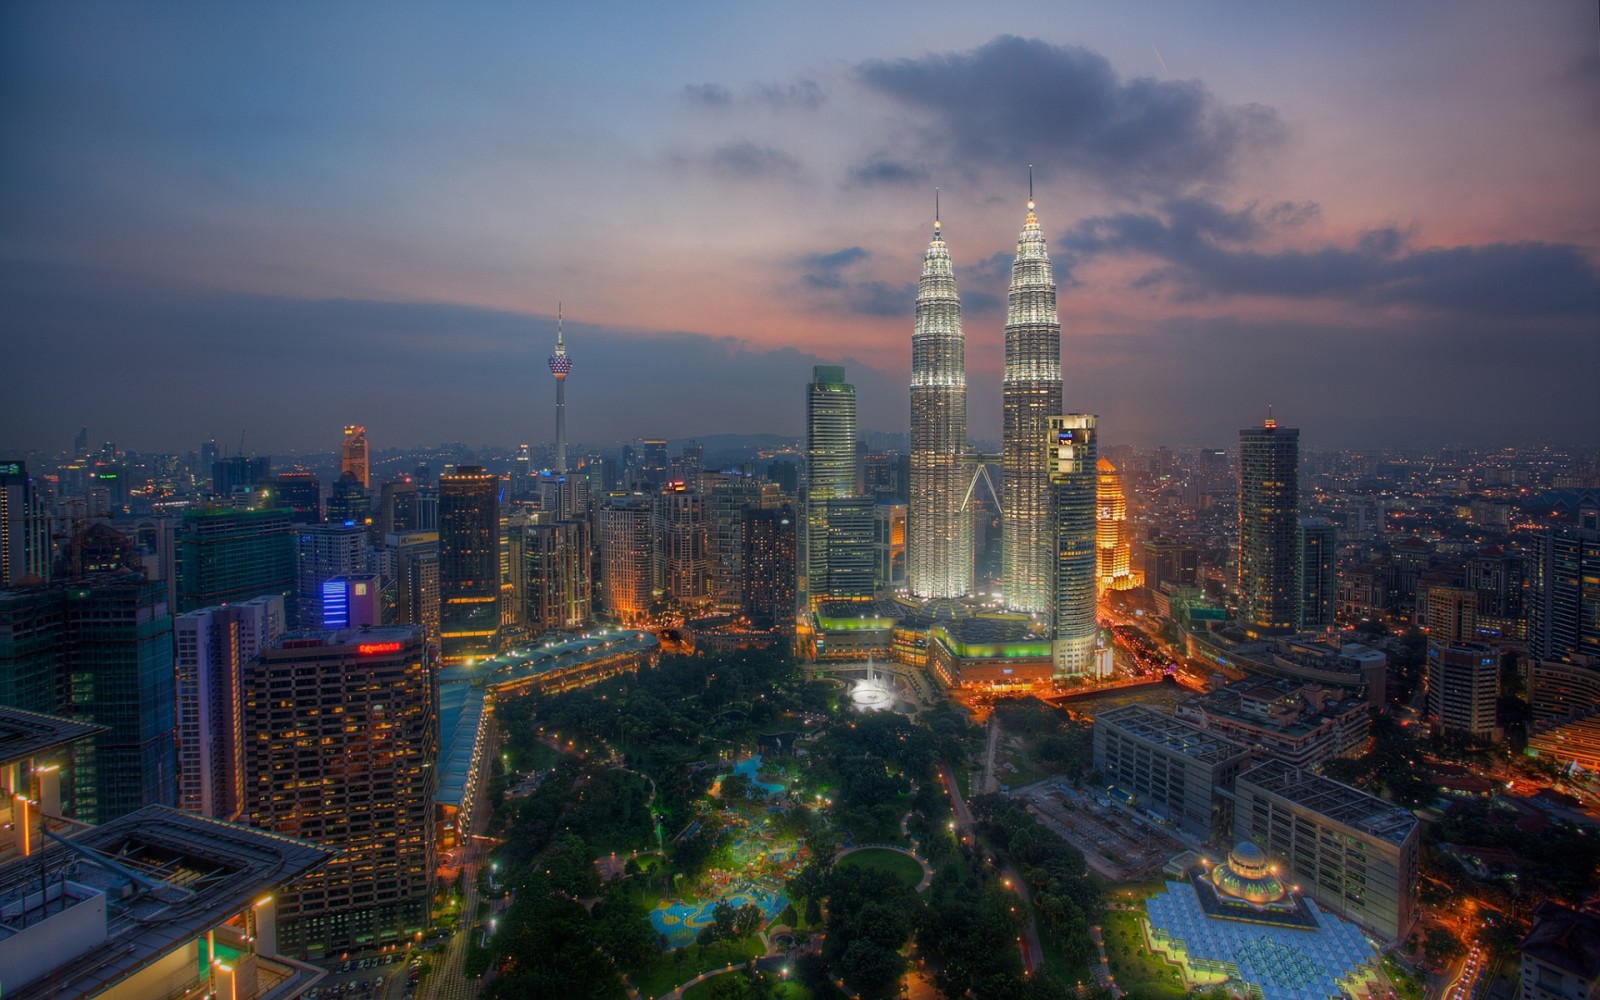 KL to host Pitch Day for fintech startups